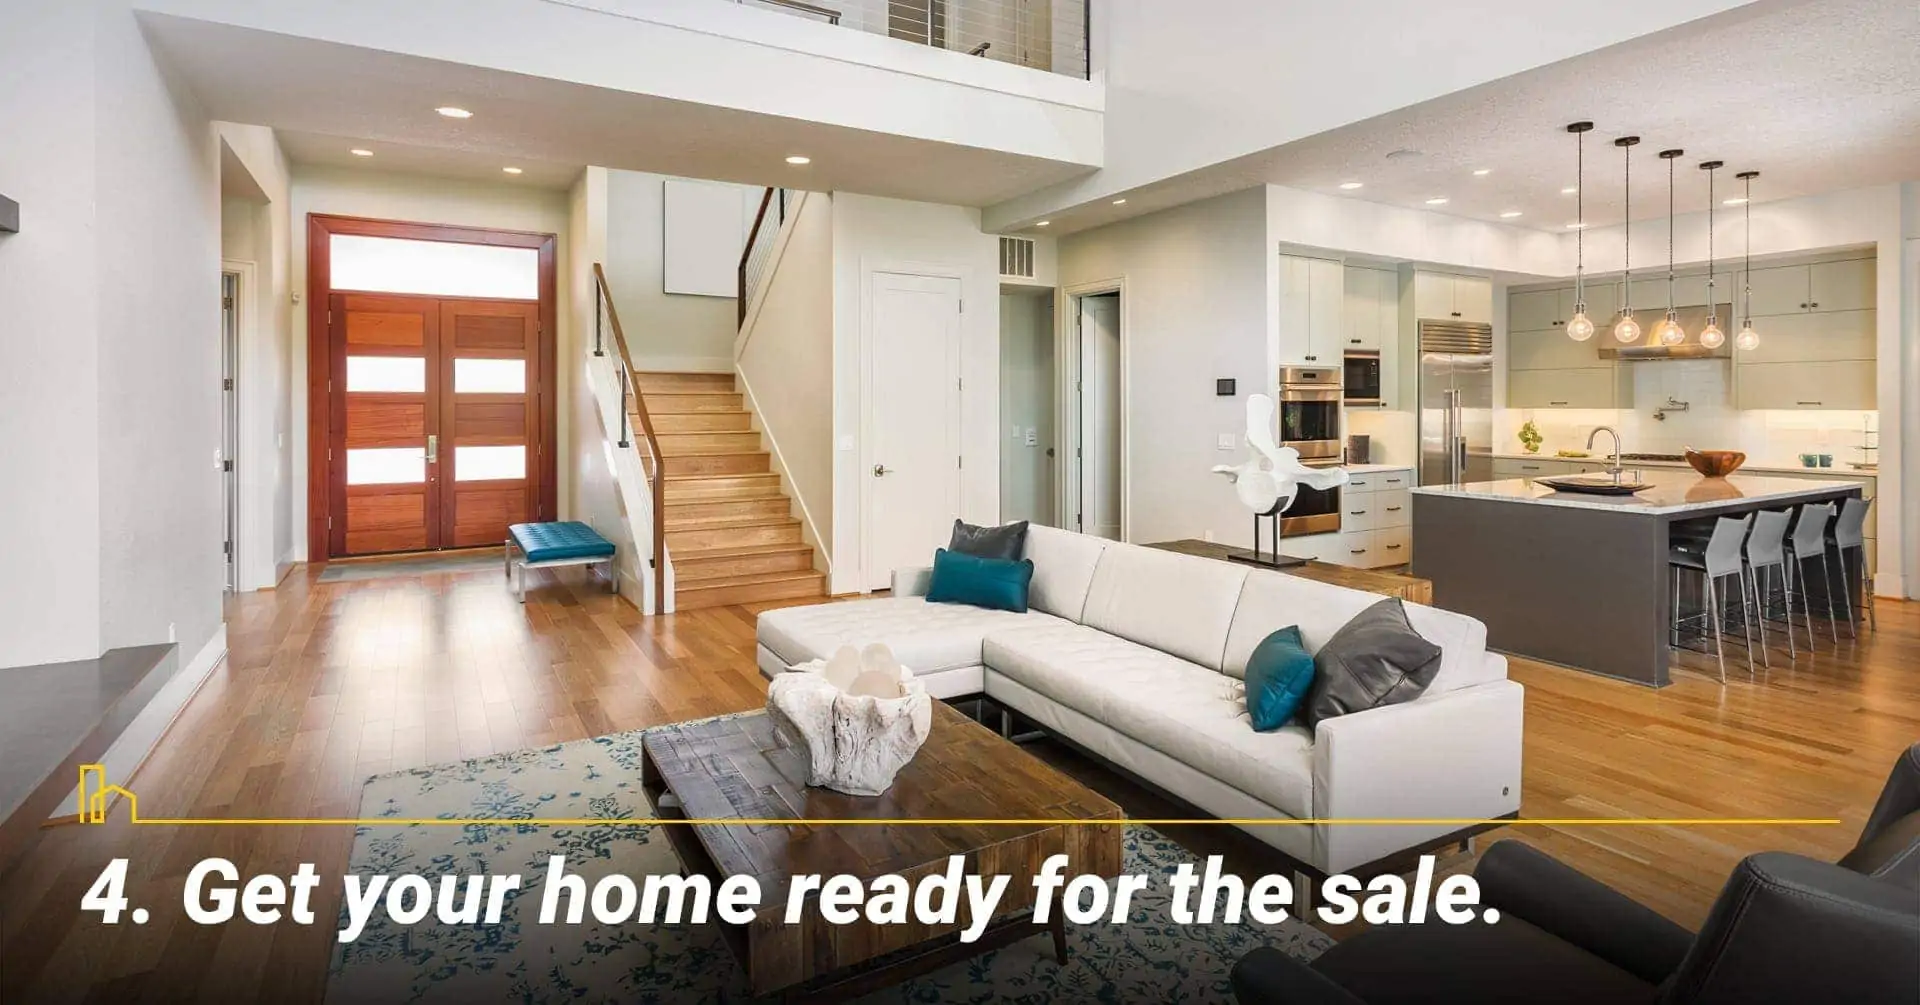 Get your home ready for the sale, stage your home for sale